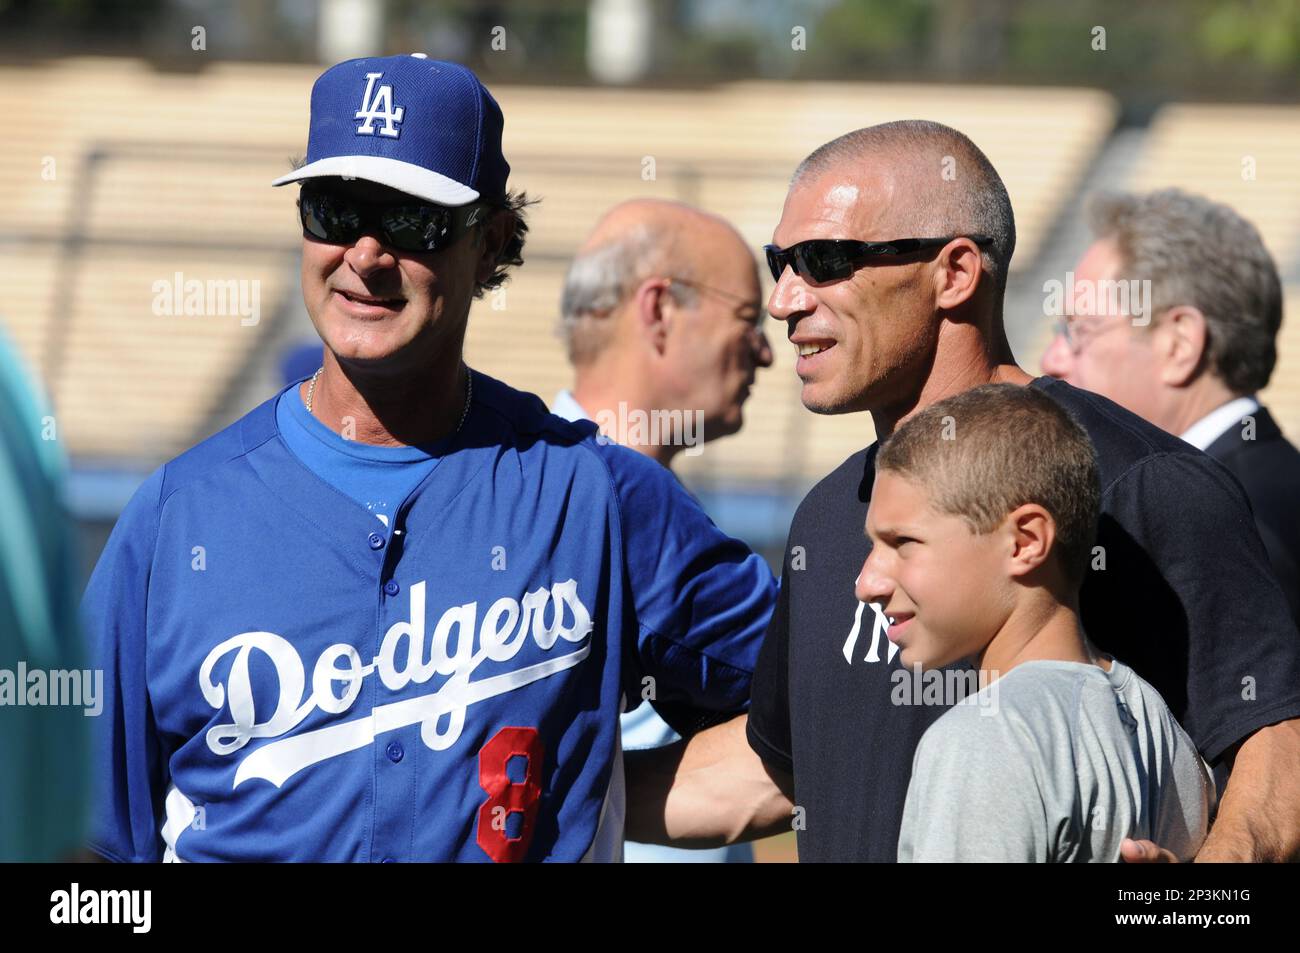 30 July 2013: Yankees manager Joe Girardi and his son Dante Girardi take a  photo with Dodgers manager Don Mattingly prior a Major League Baseball  interleague game between the New York Yankees